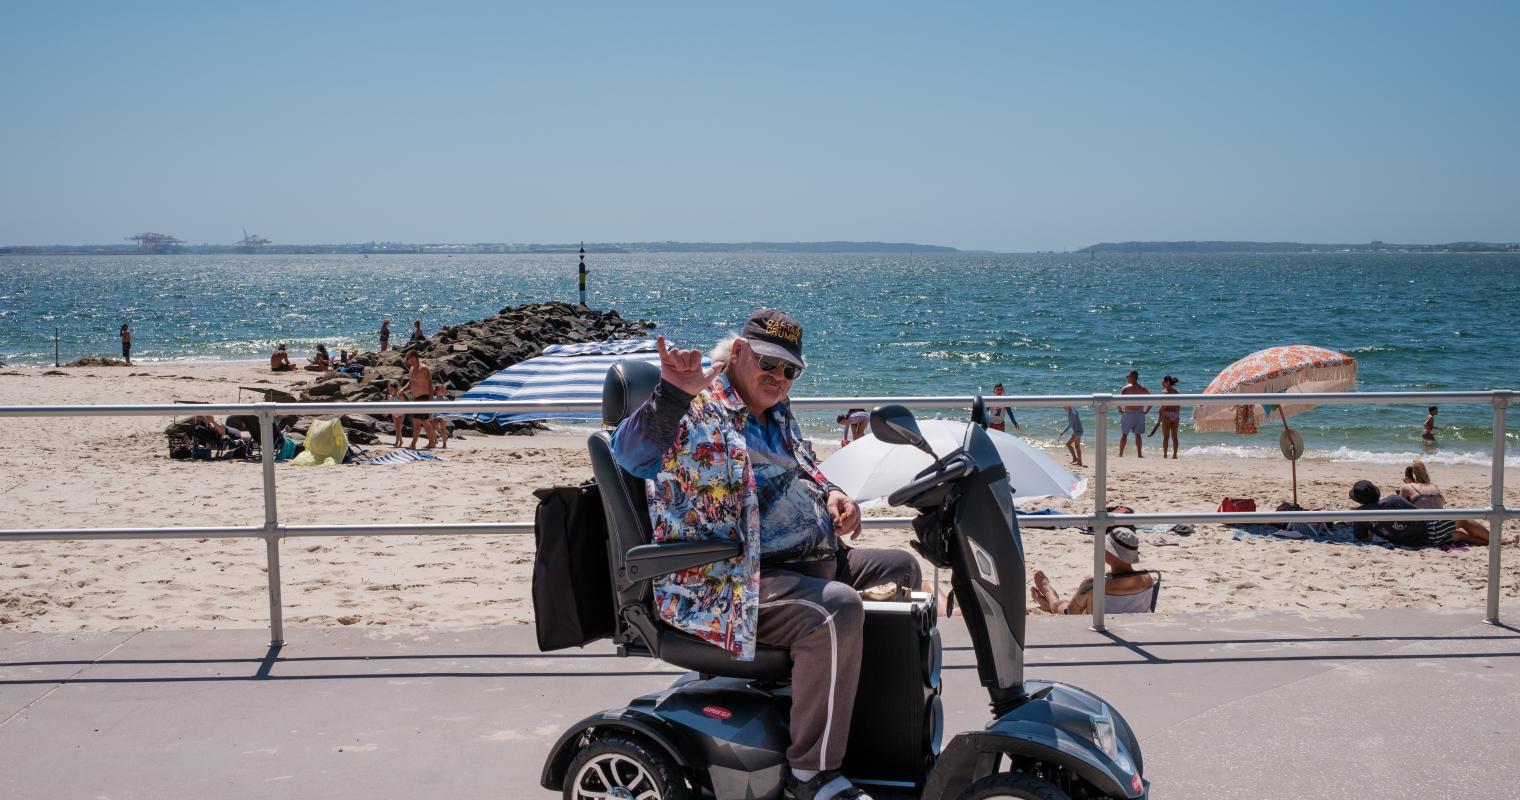 image of a person on a mobility scooter at the beach